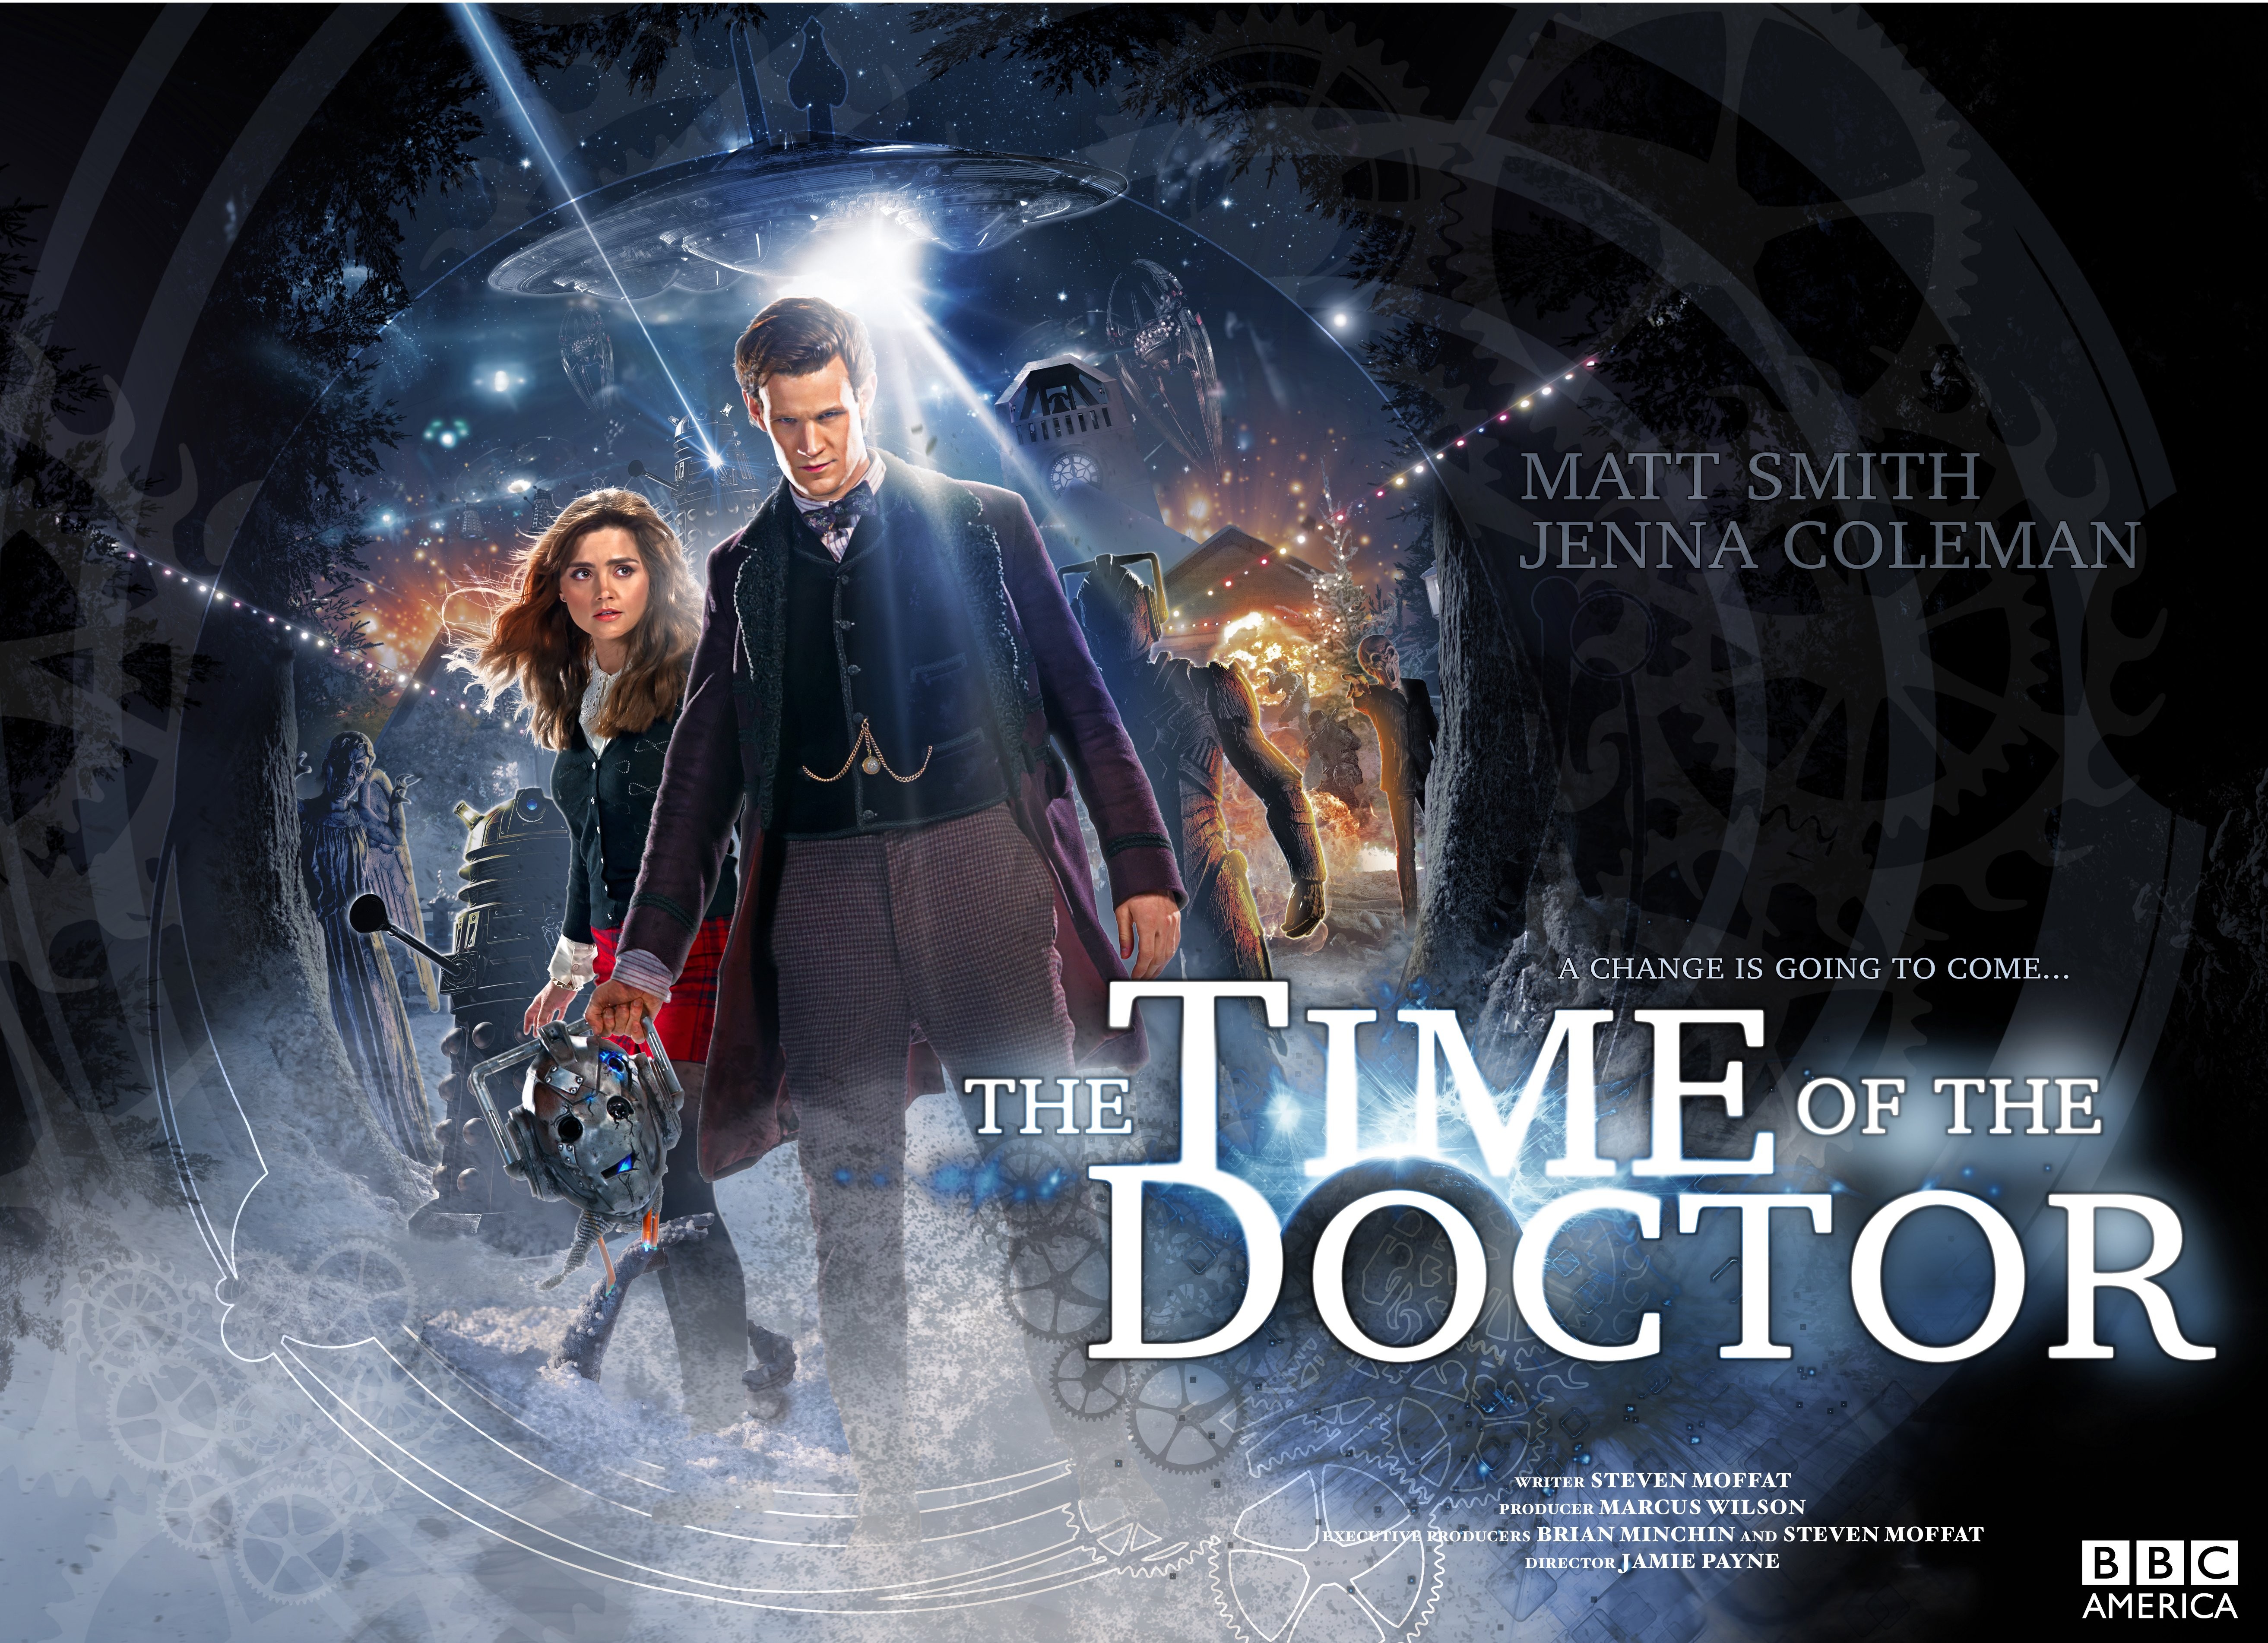 Doctor Who, The Time Of The Doctor, Matt Smith, Jenna Coleman, The Doctor, Eleventh Doctor Wallpaper